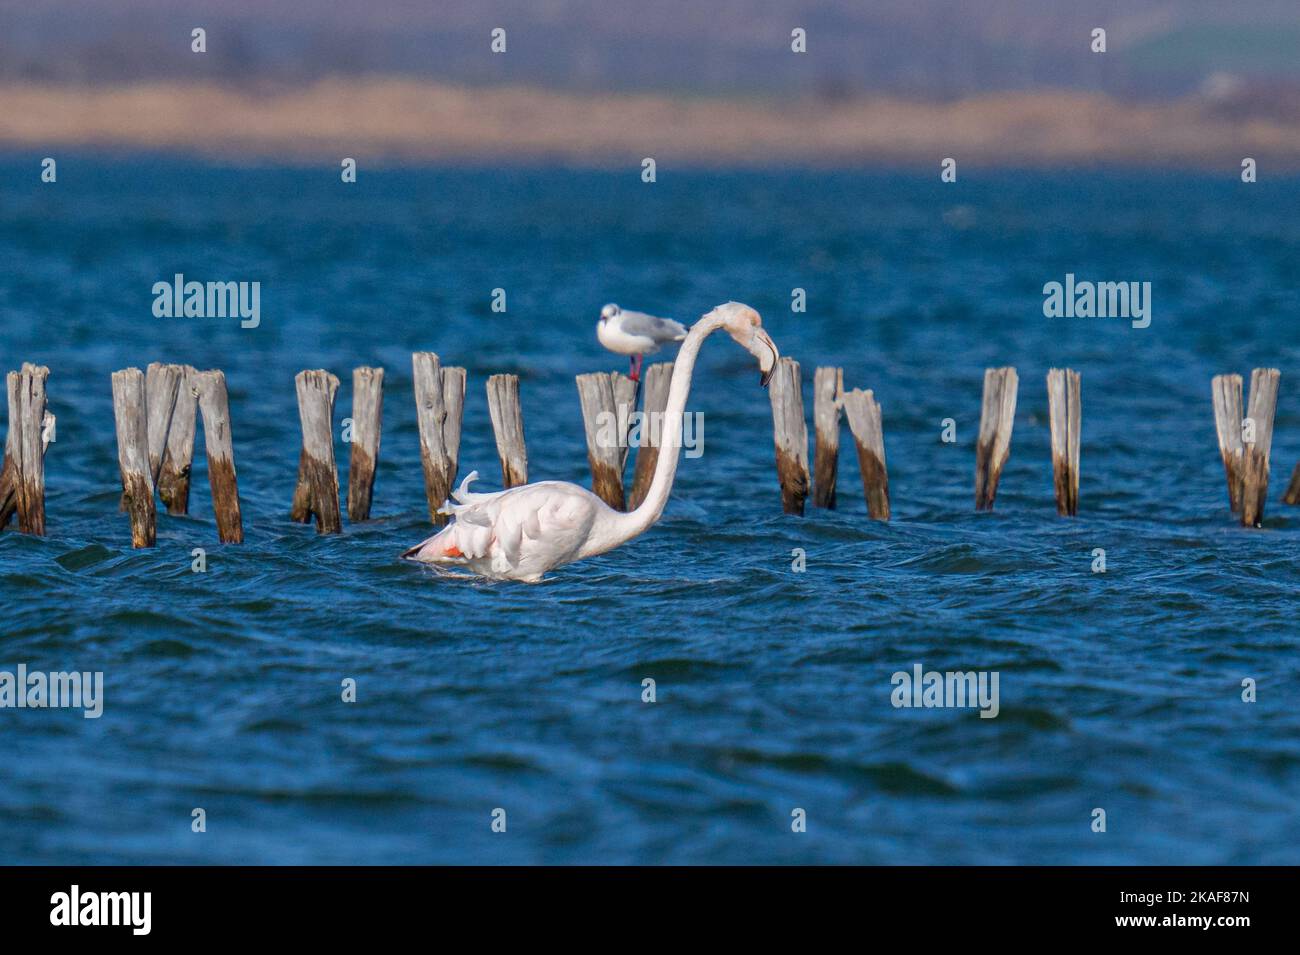 A view of a beautiful gull and flamingo in the sea on a sunny day Stock Photo